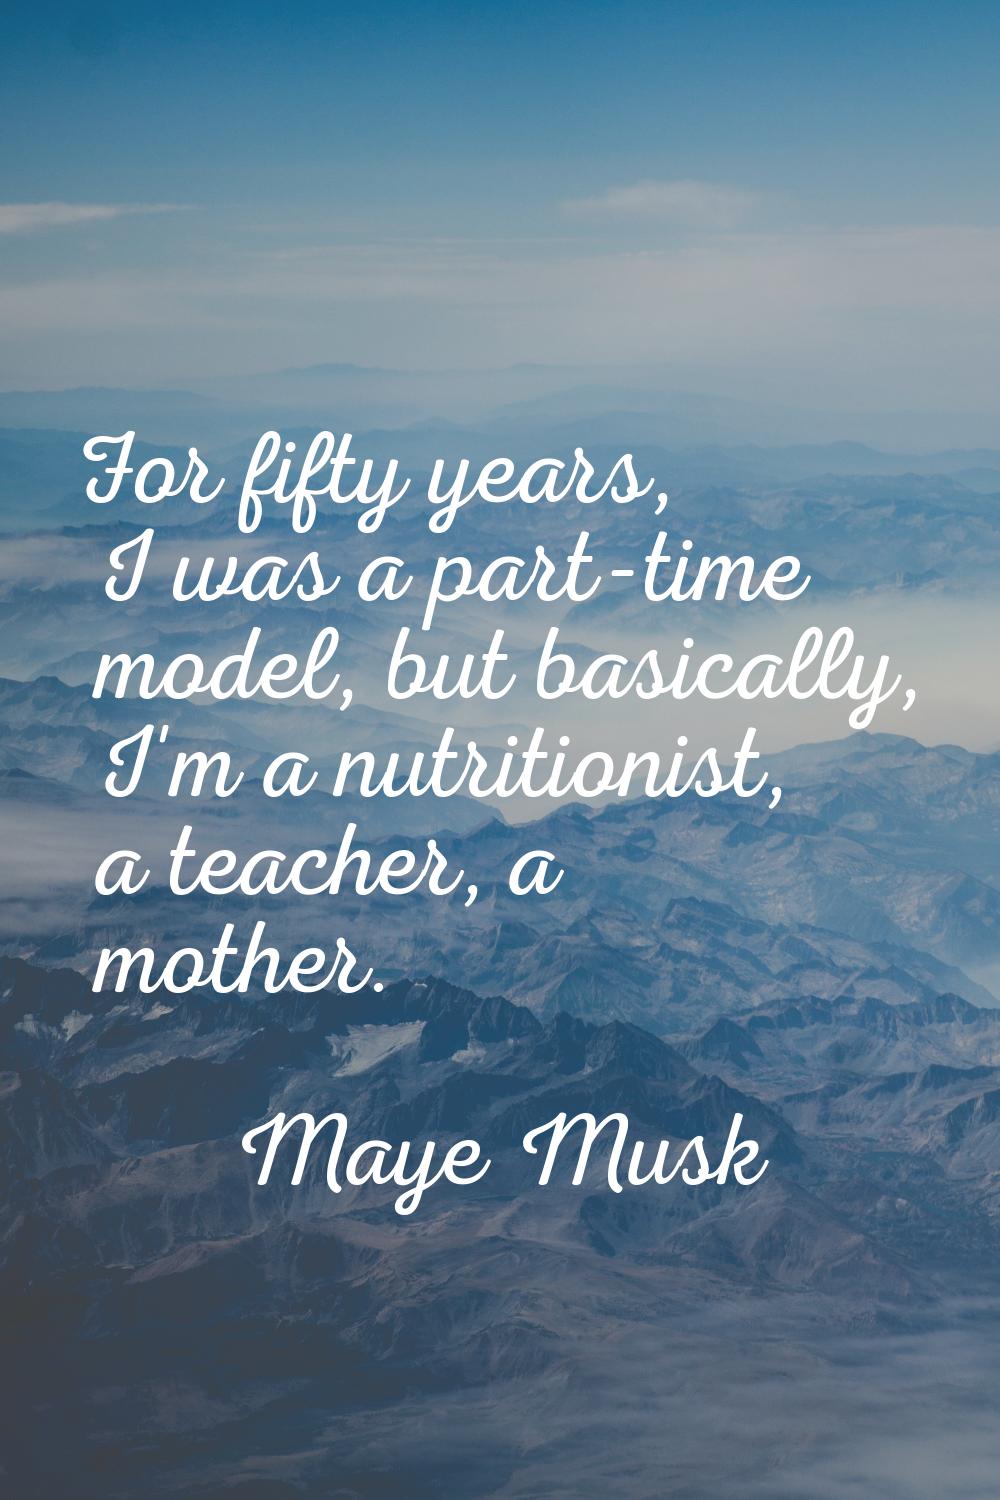 For fifty years, I was a part-time model, but basically, I'm a nutritionist, a teacher, a mother.